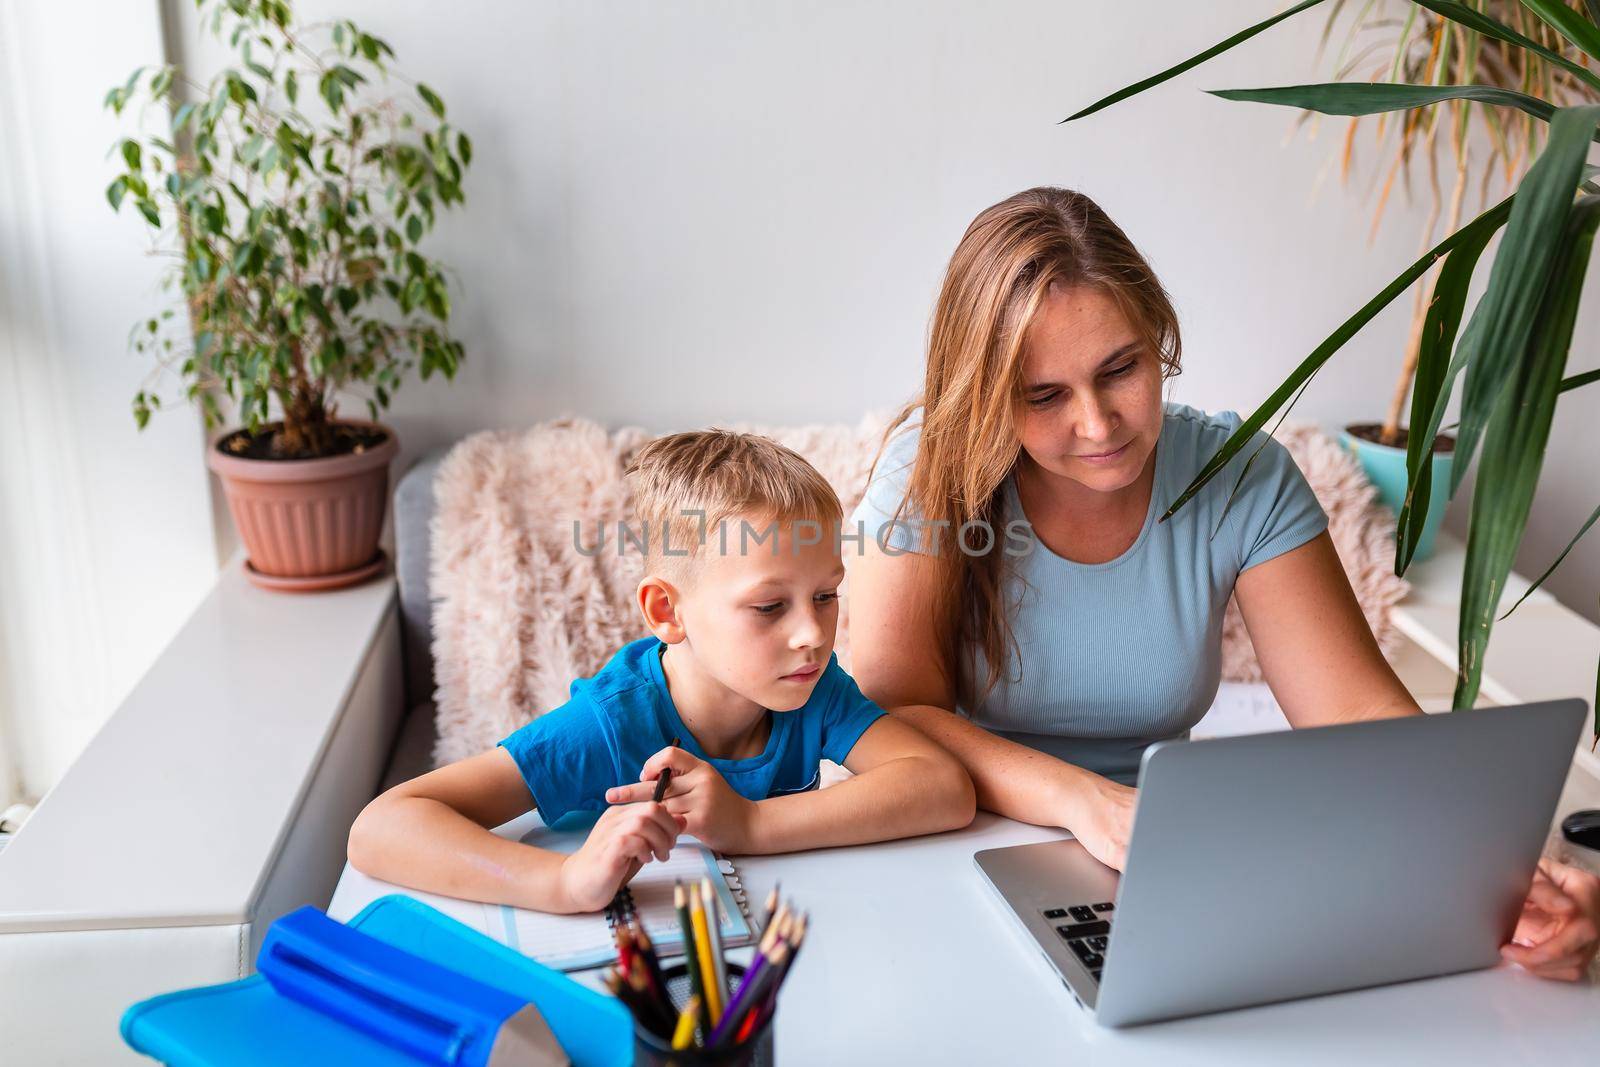 Mother with kid trying to work from home during quarantine. Stay at home, work from home concept during coronavirus pandemic